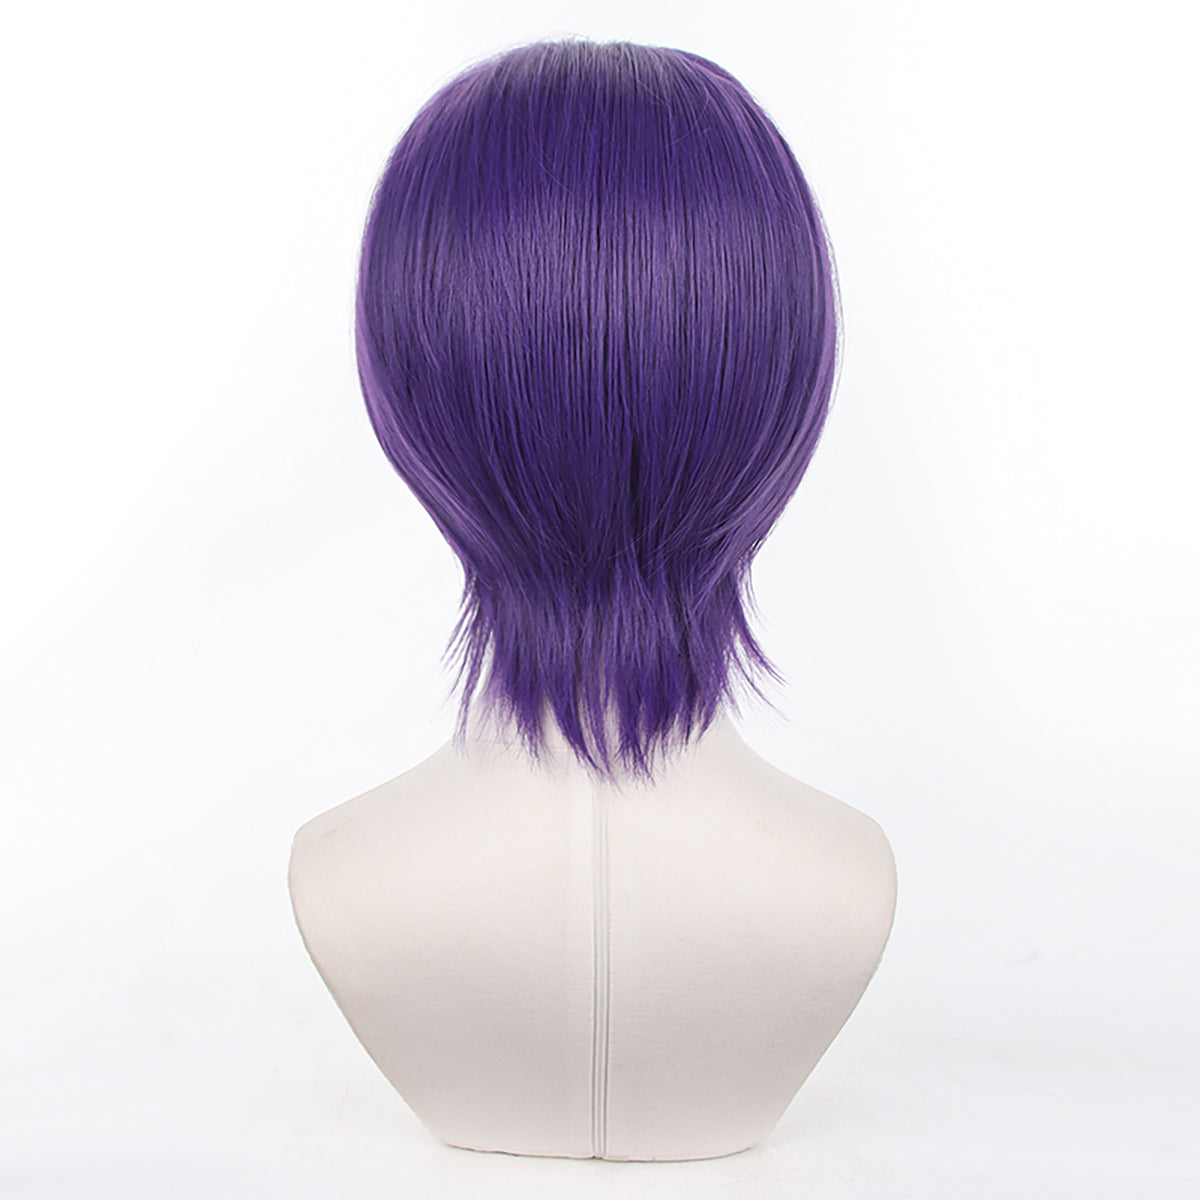 HOLOUN Blue Lock Anime Reo Mikage Cosplay Costume Wig Casual Daily Wearing Sweater Pants Outfit Rose Net Sythetic Fiber Gift